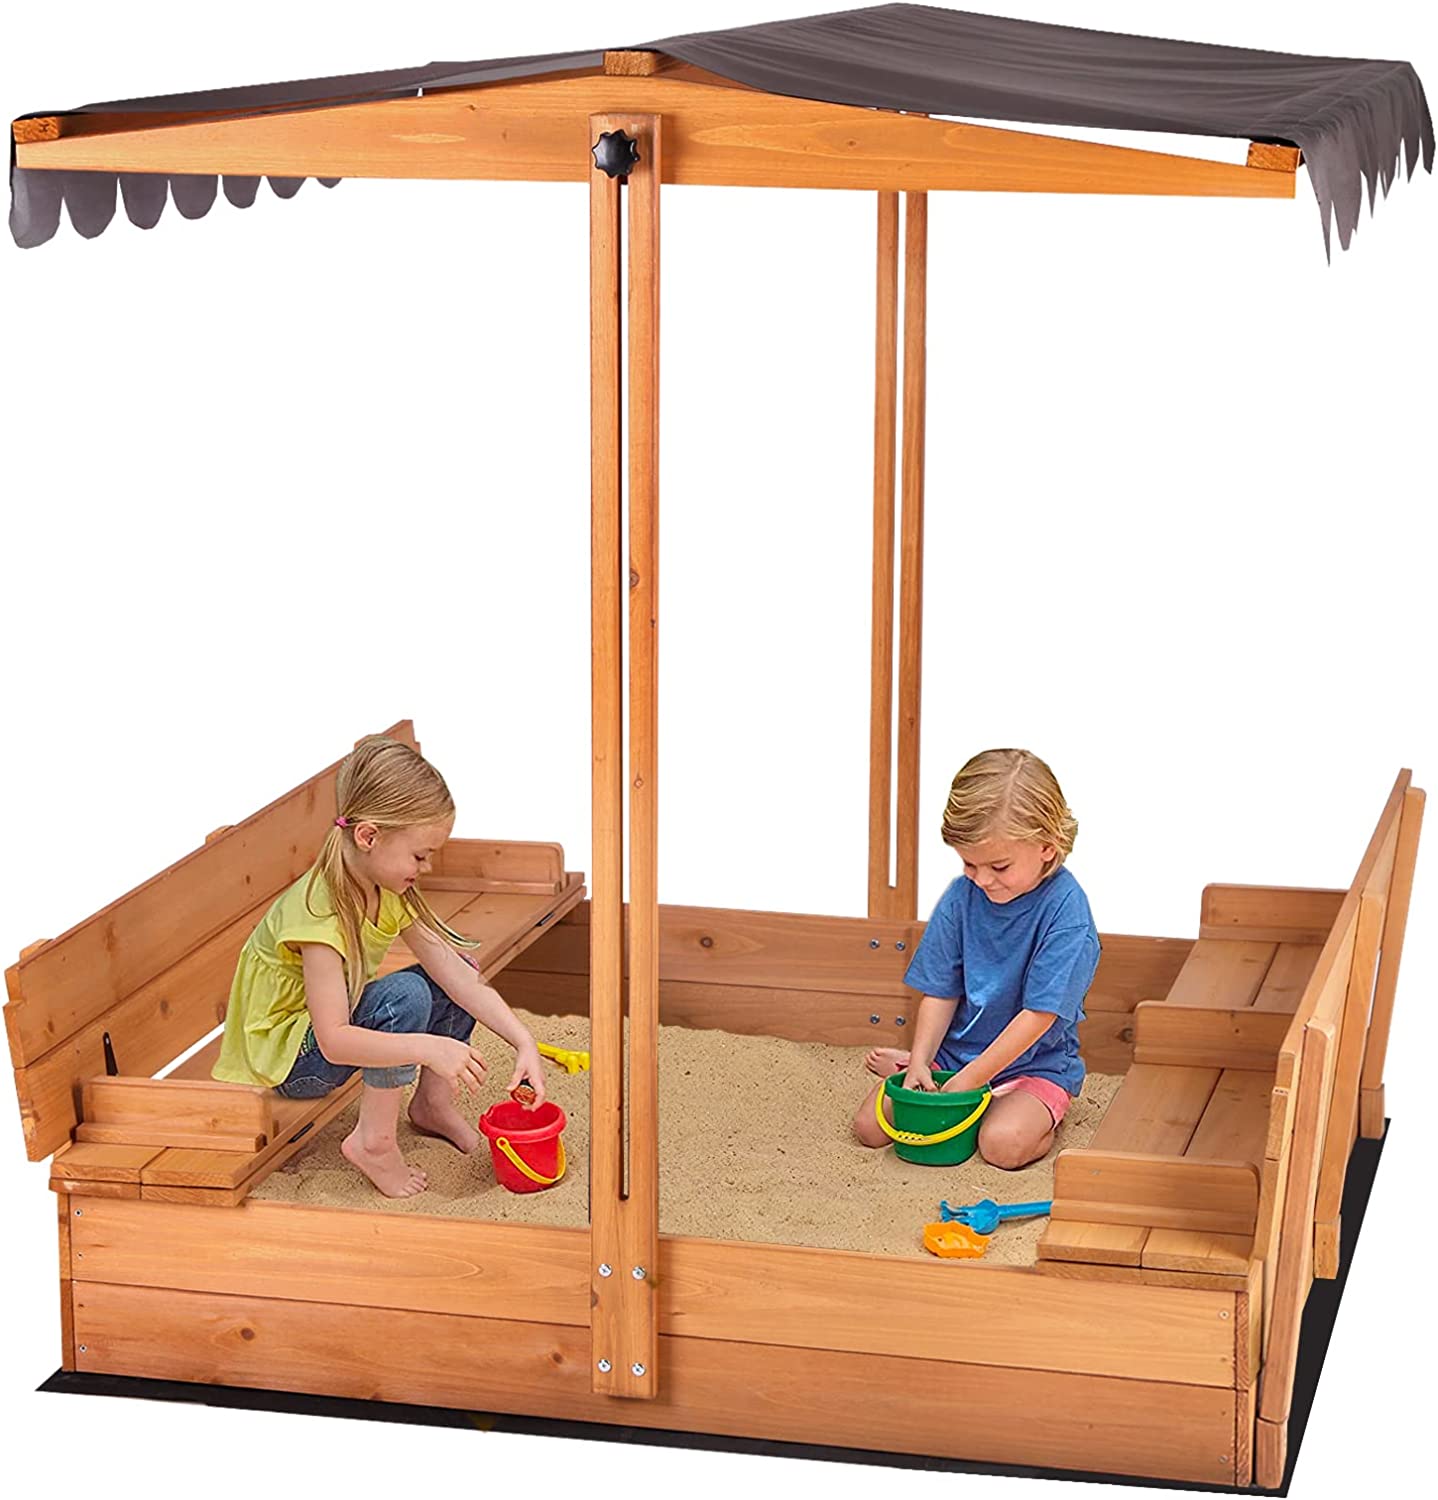 Aivituvin All-Weather Adjustable Canopy Covered Sandbox